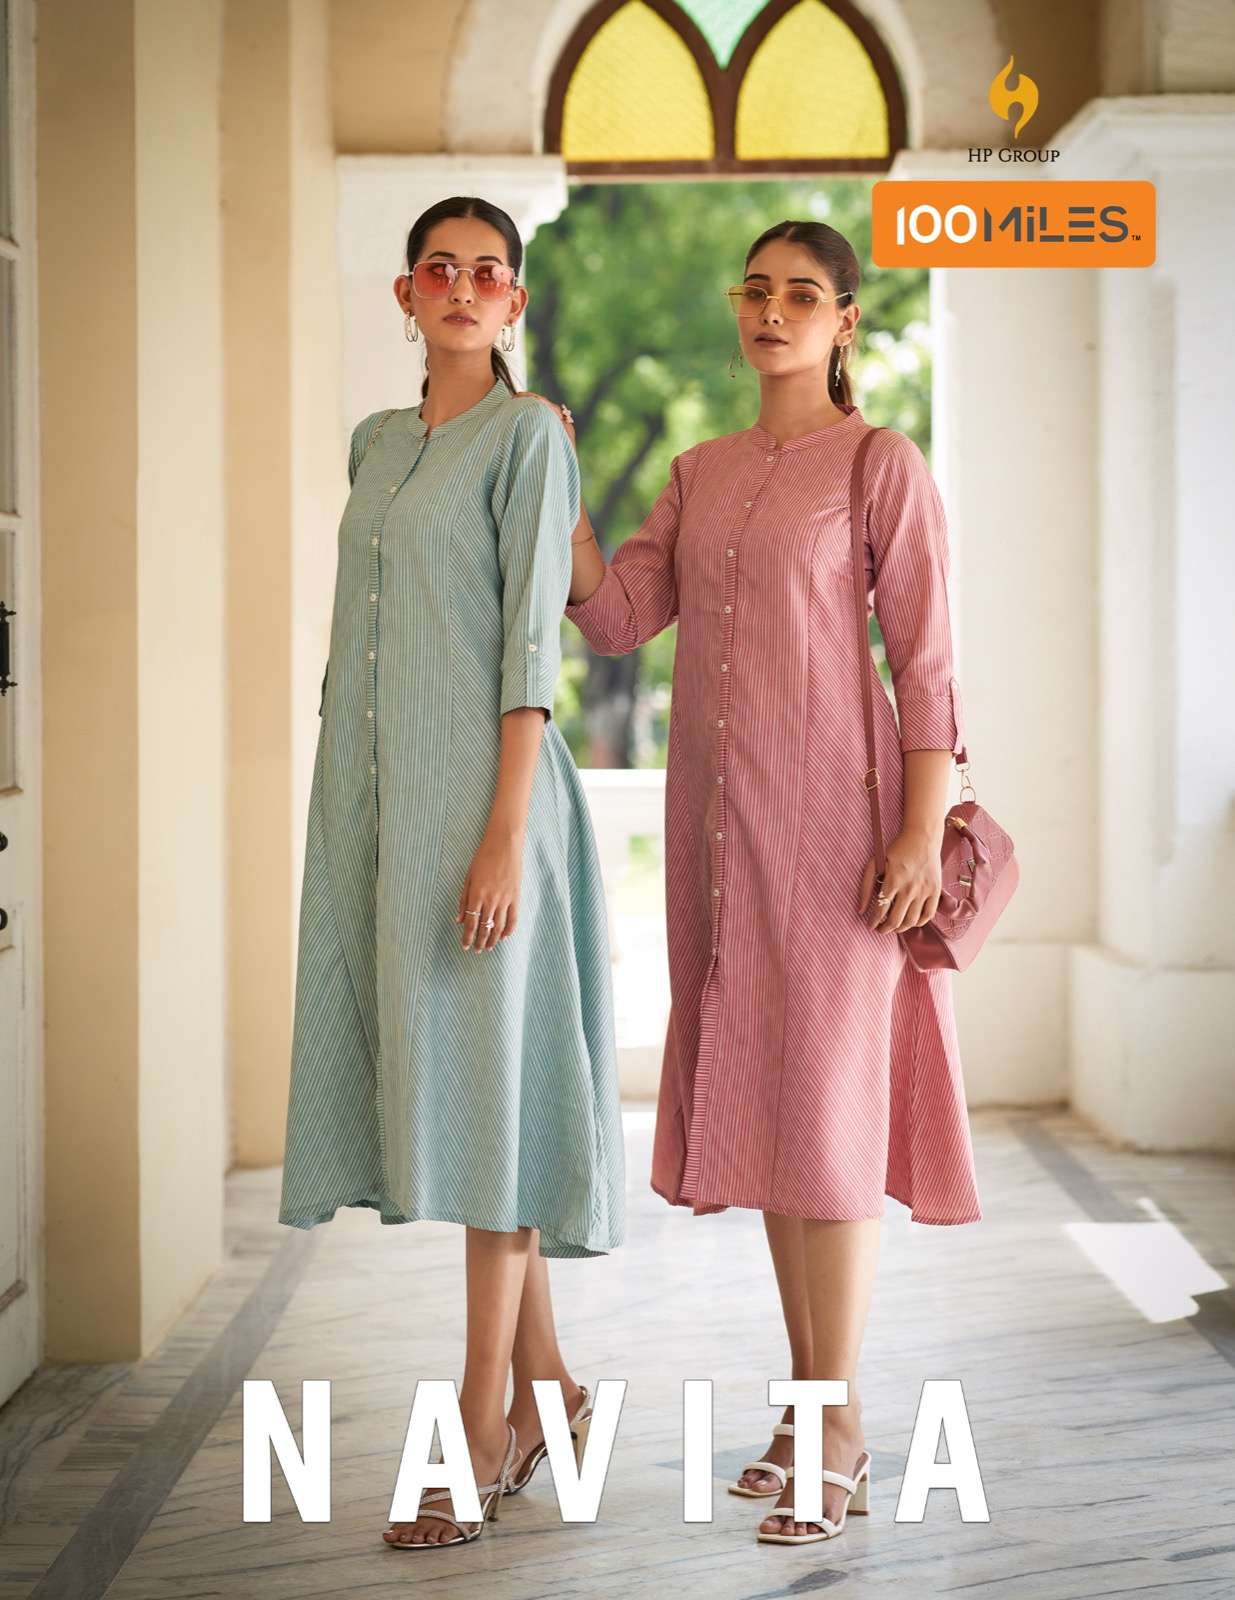 NAVITA BLENDED COTTON SELF PATTERN KURTI DRESS WITH FLAIR BY 100MILES BRAND WHOLESALER AND DEALER